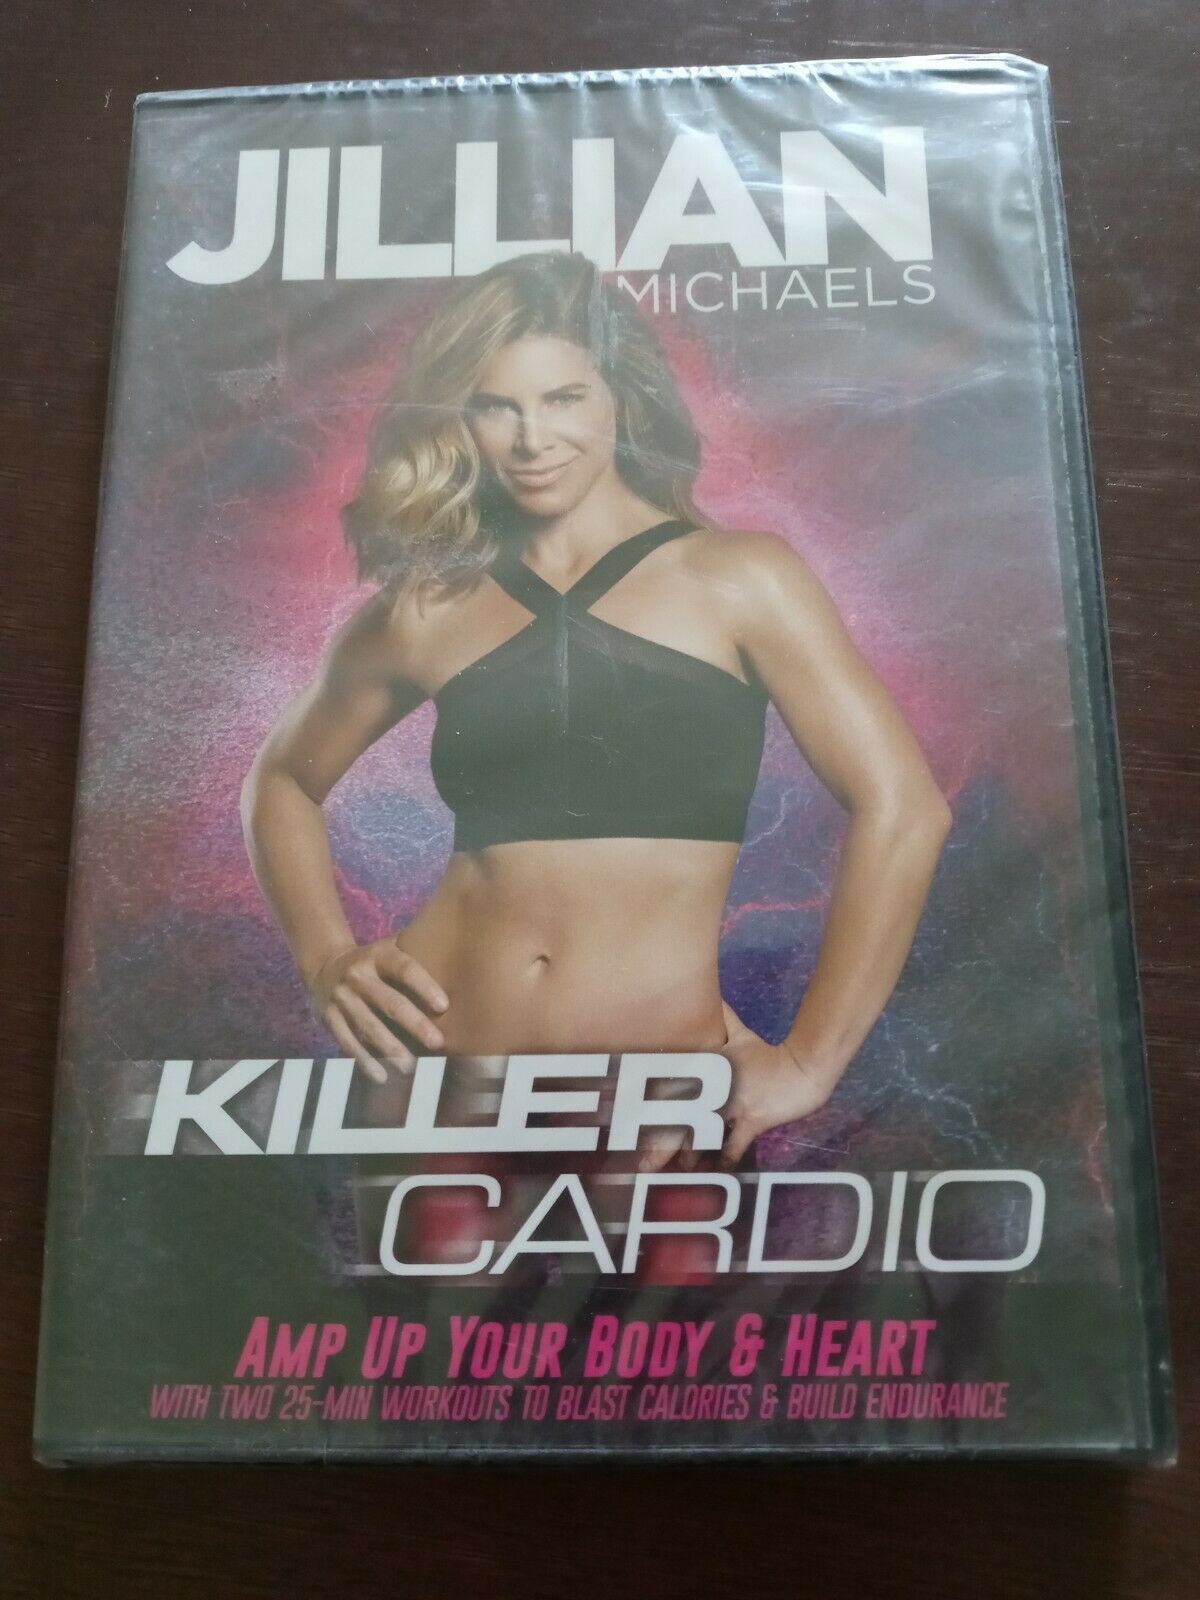 Primary image for Jillian Michaels Killer Cardio DVD Fitness Training Workout Exercise Video NEW